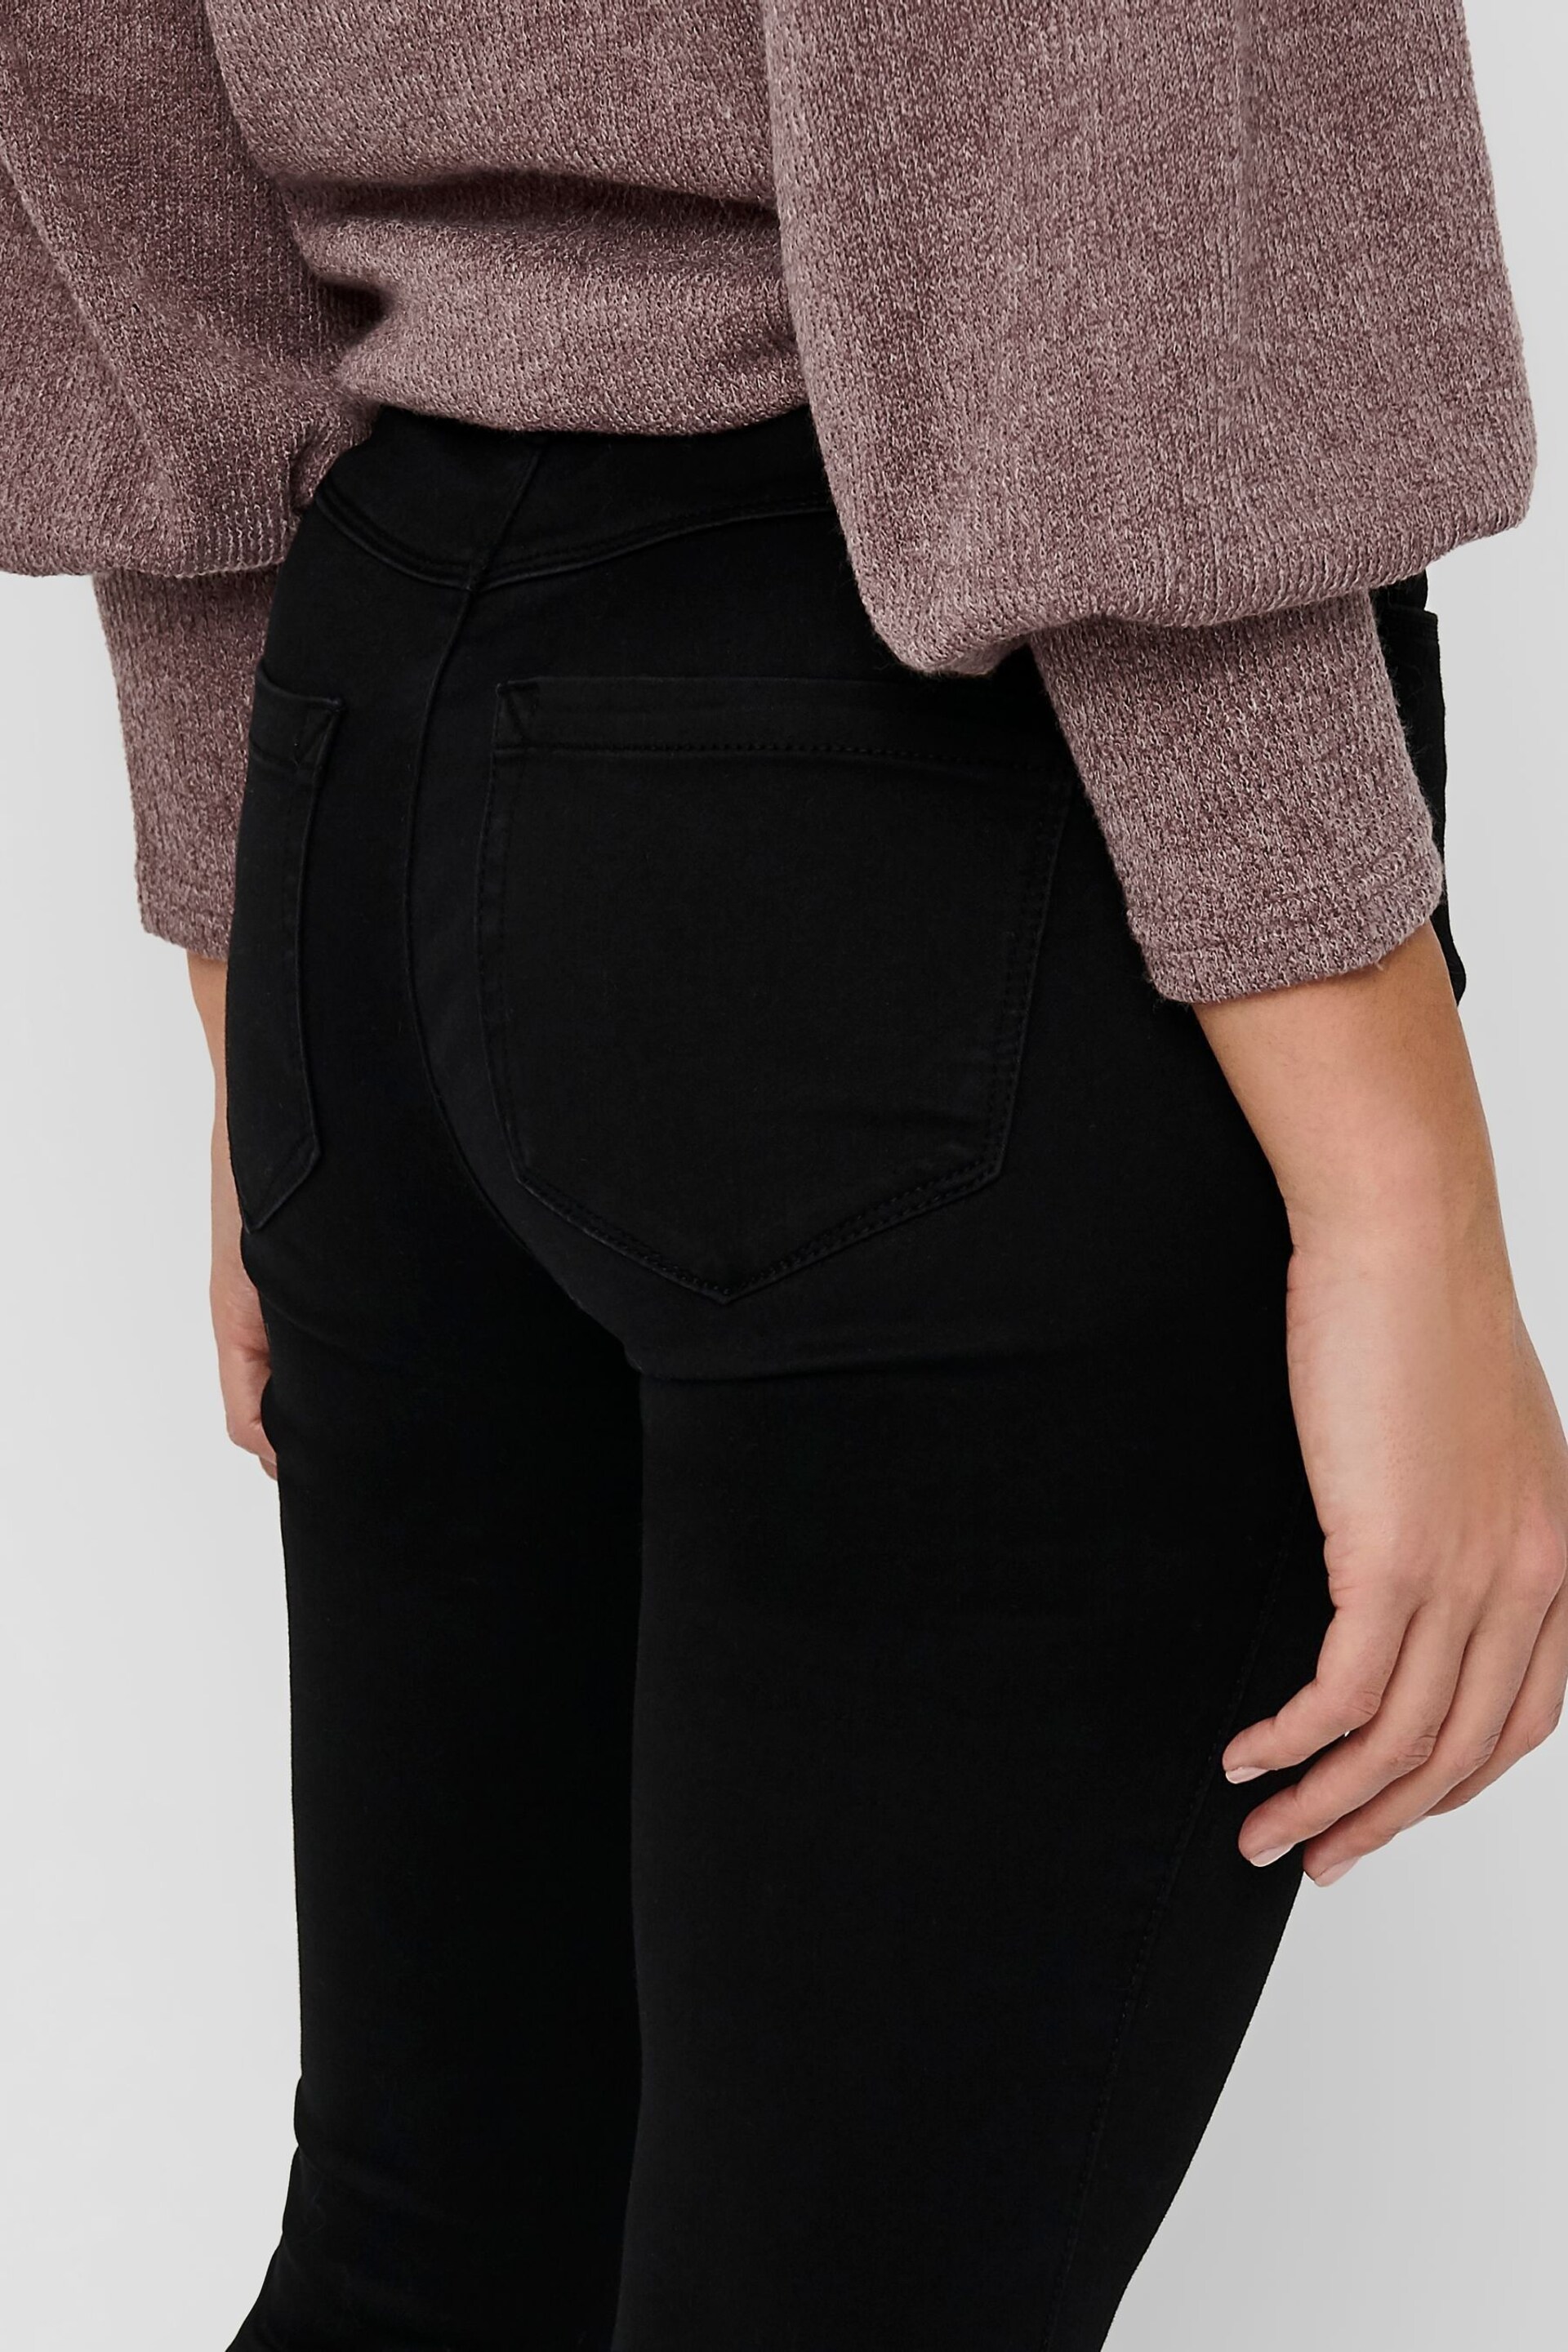 ONLY Black High Waisted Stretch Flare Jeans - Image 4 of 5